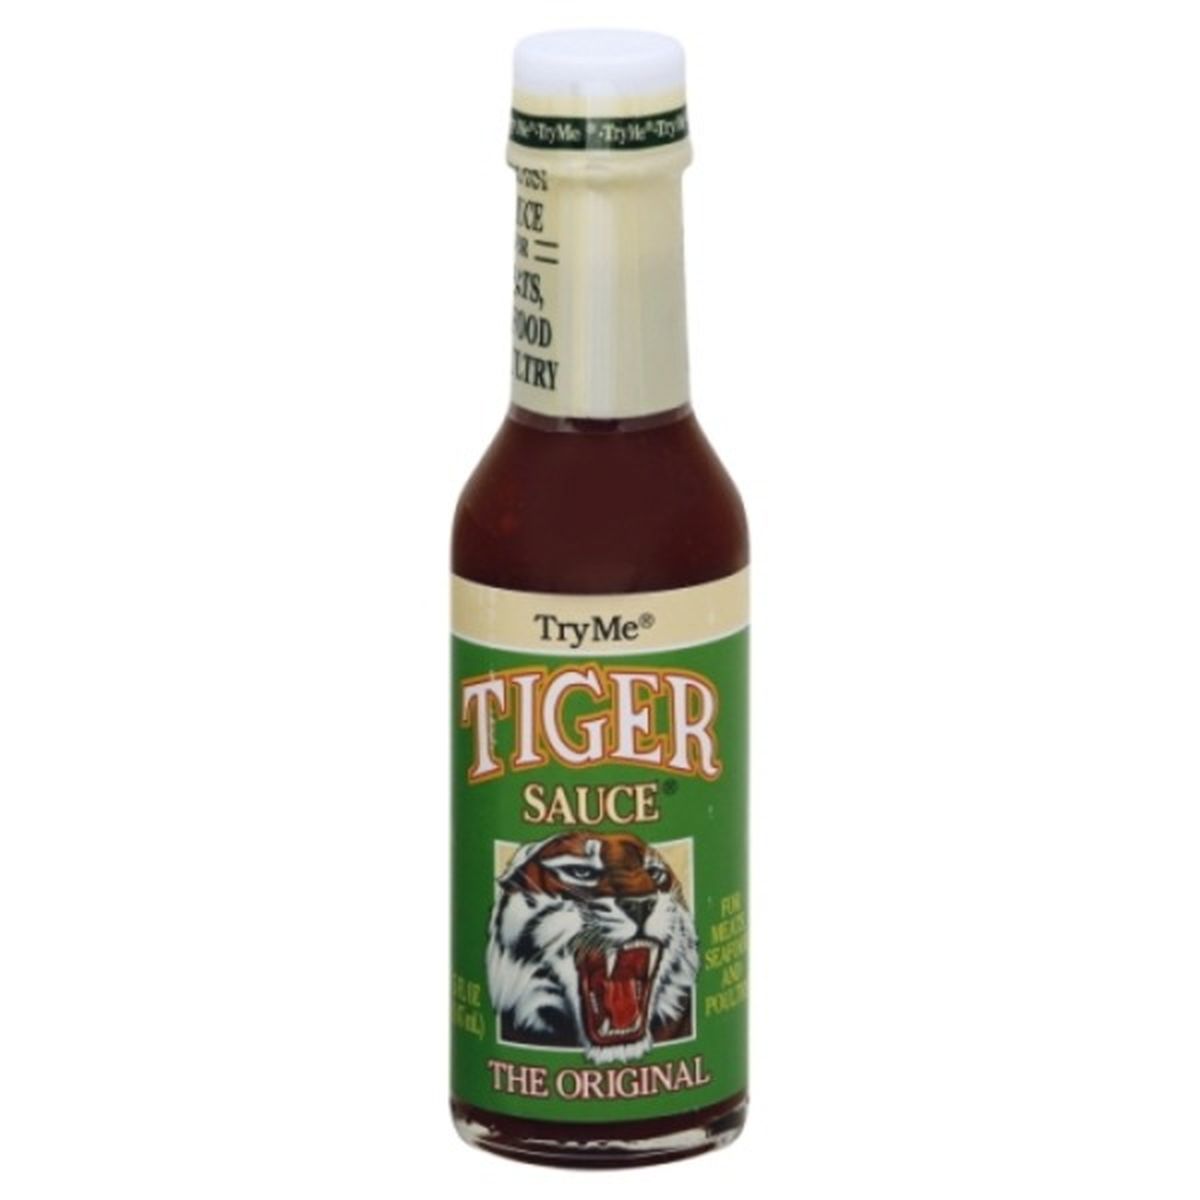 Calories in Try Me Tiger Sauce, The Original